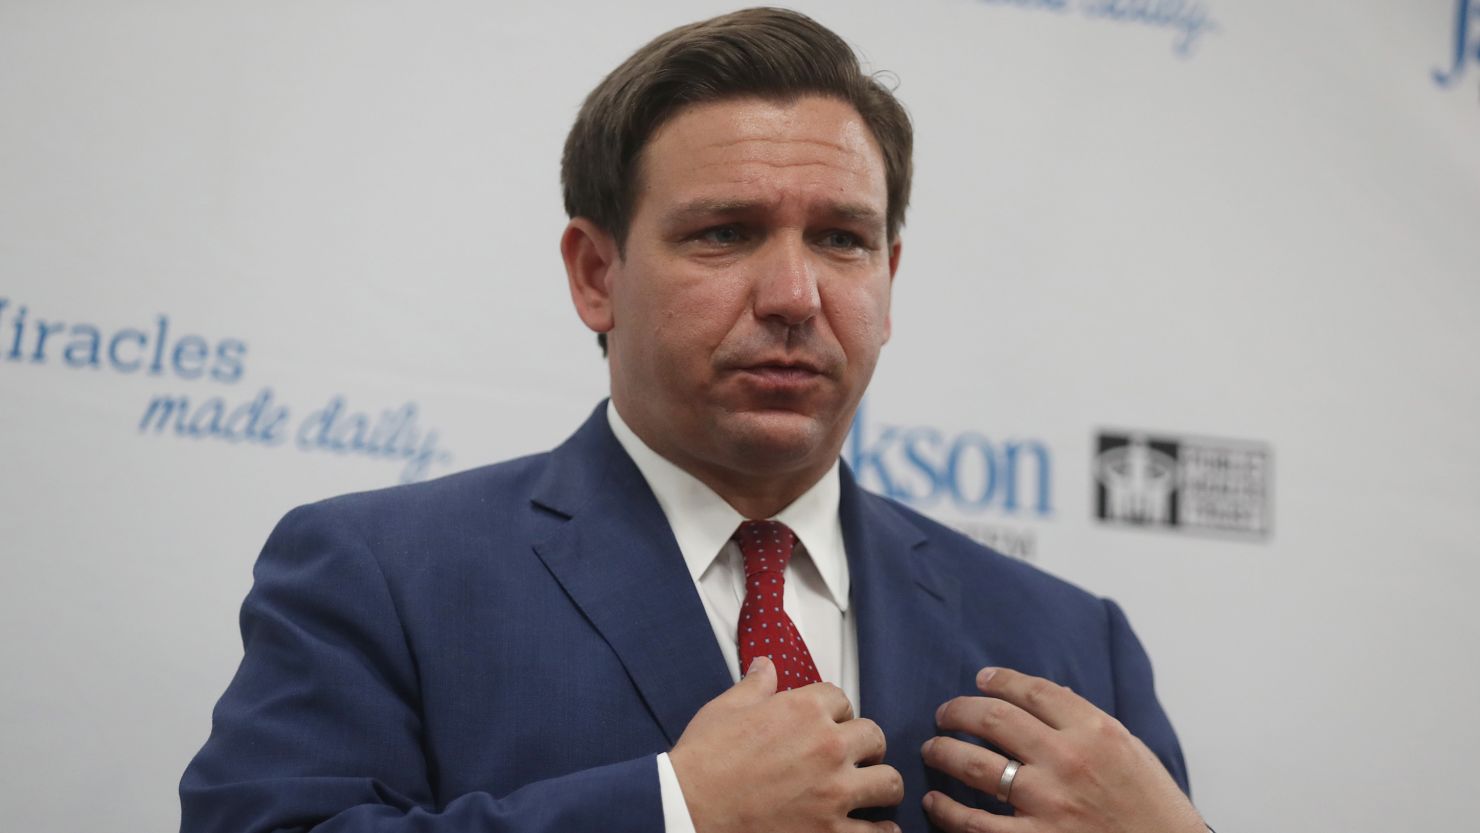 Coronavirus cases are surging in Florida. The state is now second only to California in confirmed cases, according to Johns Hopkins University. But Gov. Ron DeSantis is resisting calls to issue a statewide mask mandate.